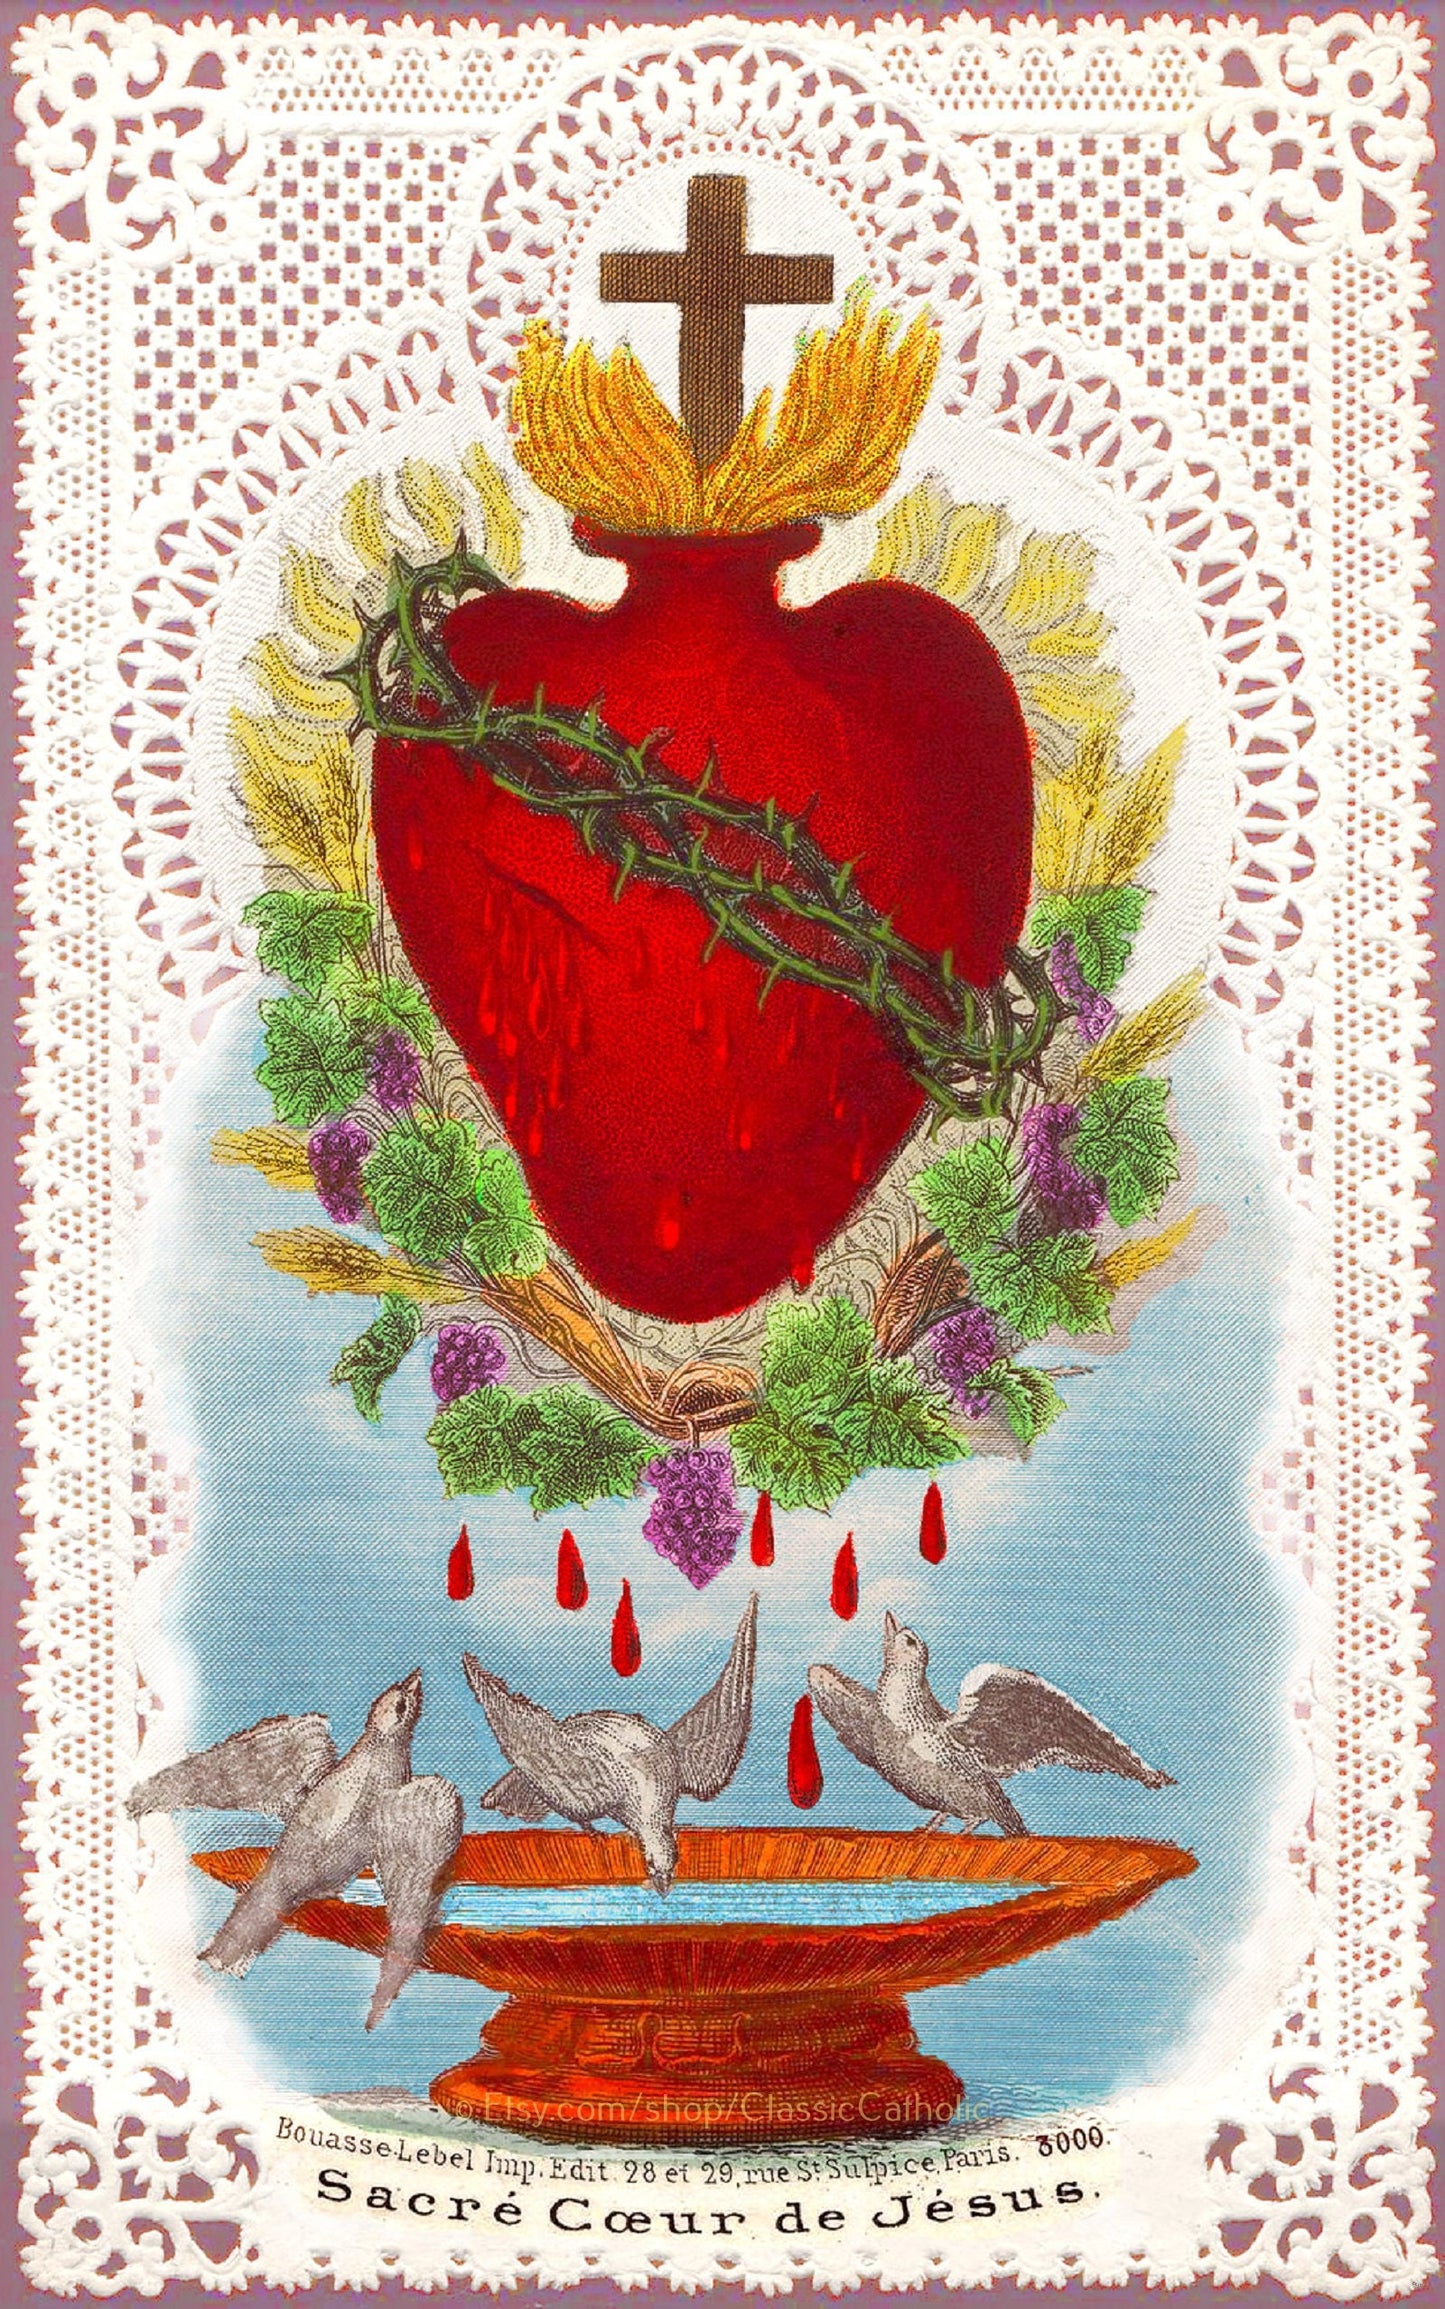 Sacred Heart of Jesus with Doves and Lace – based on a Vintage Holy Card – Catholic Art Print – Archival Quality